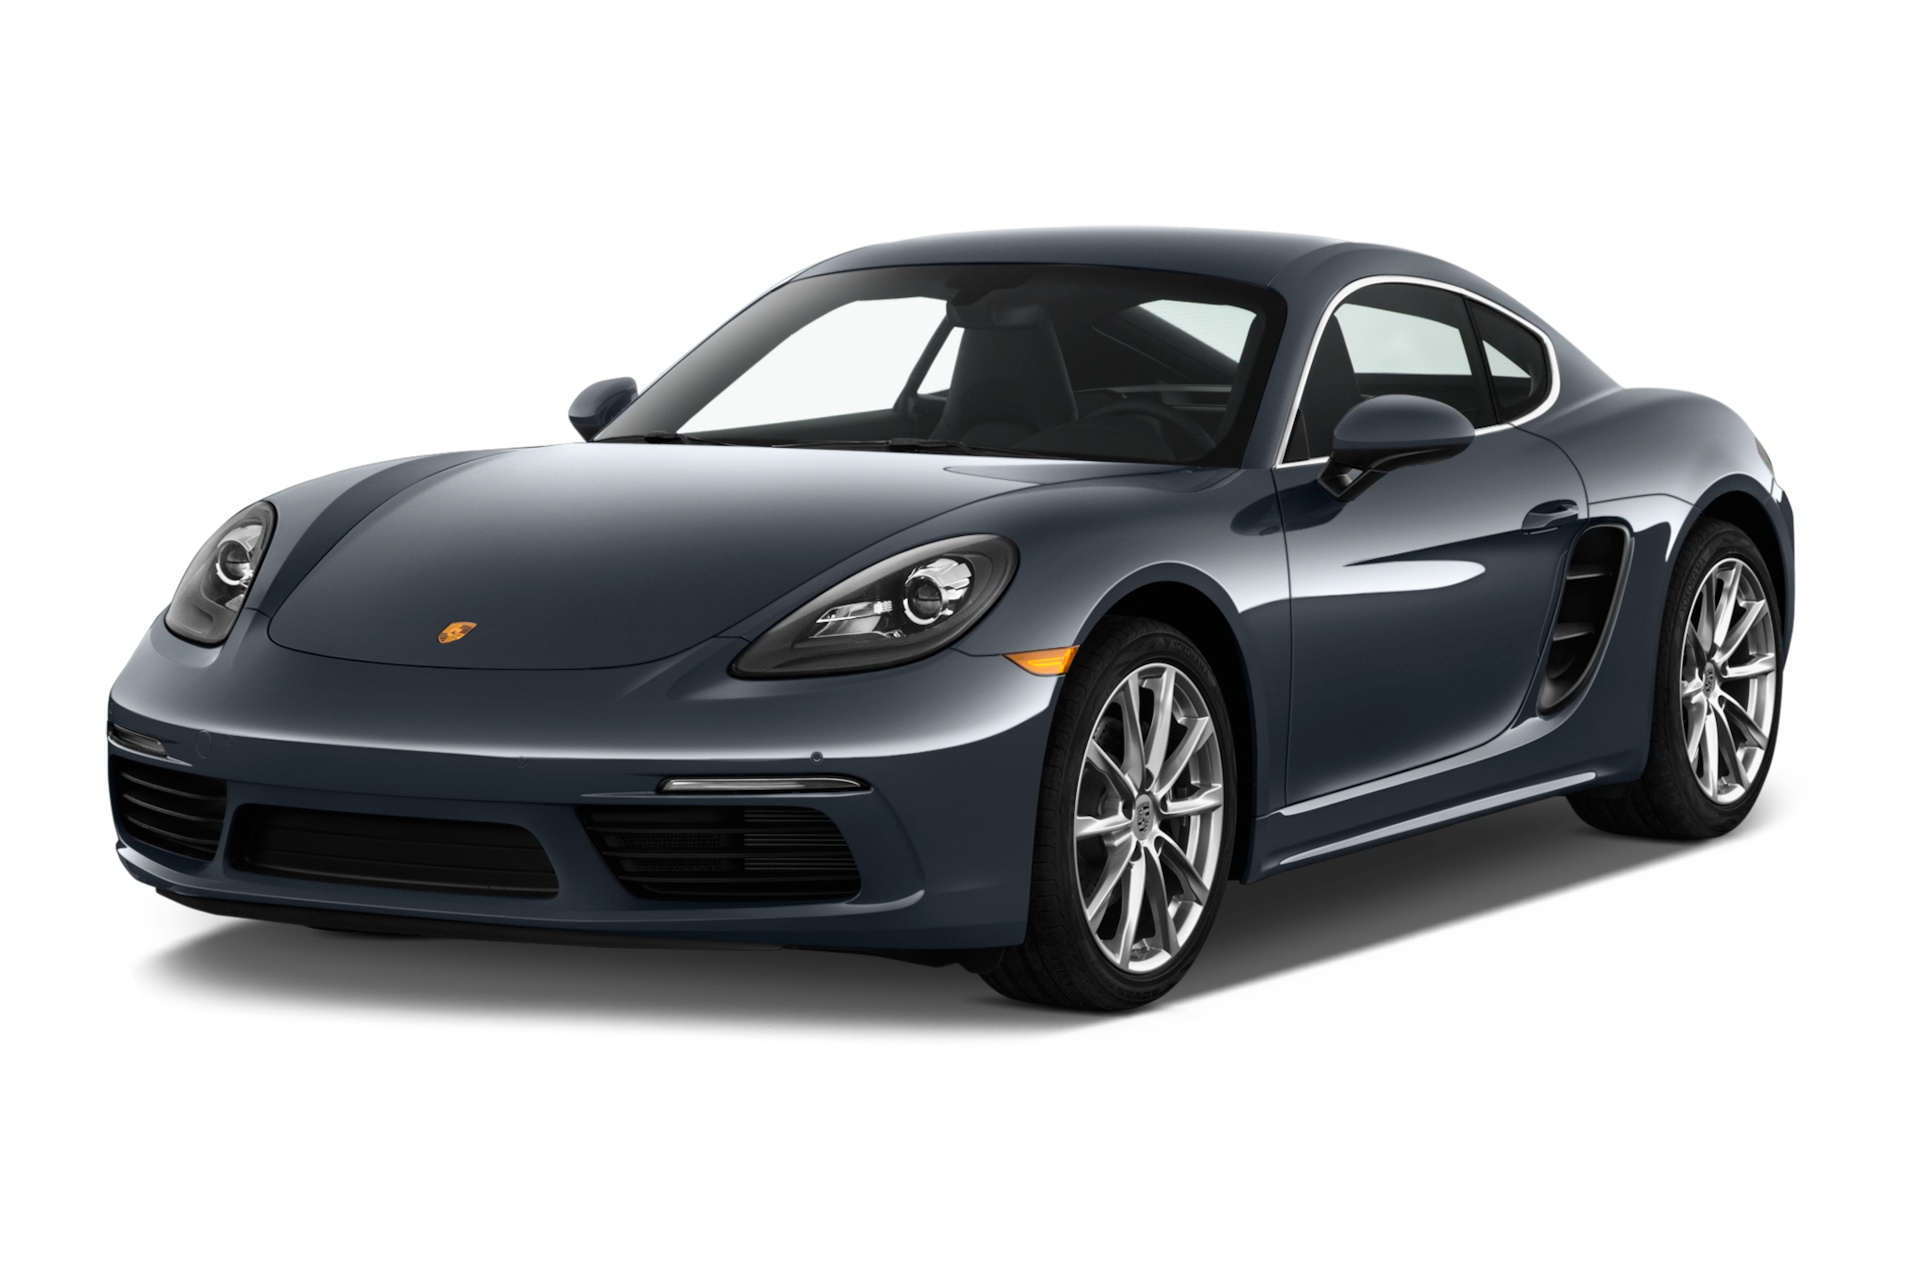 2017 Porsche 718 Cayman Prices, Reviews, and Photos - MotorTrend